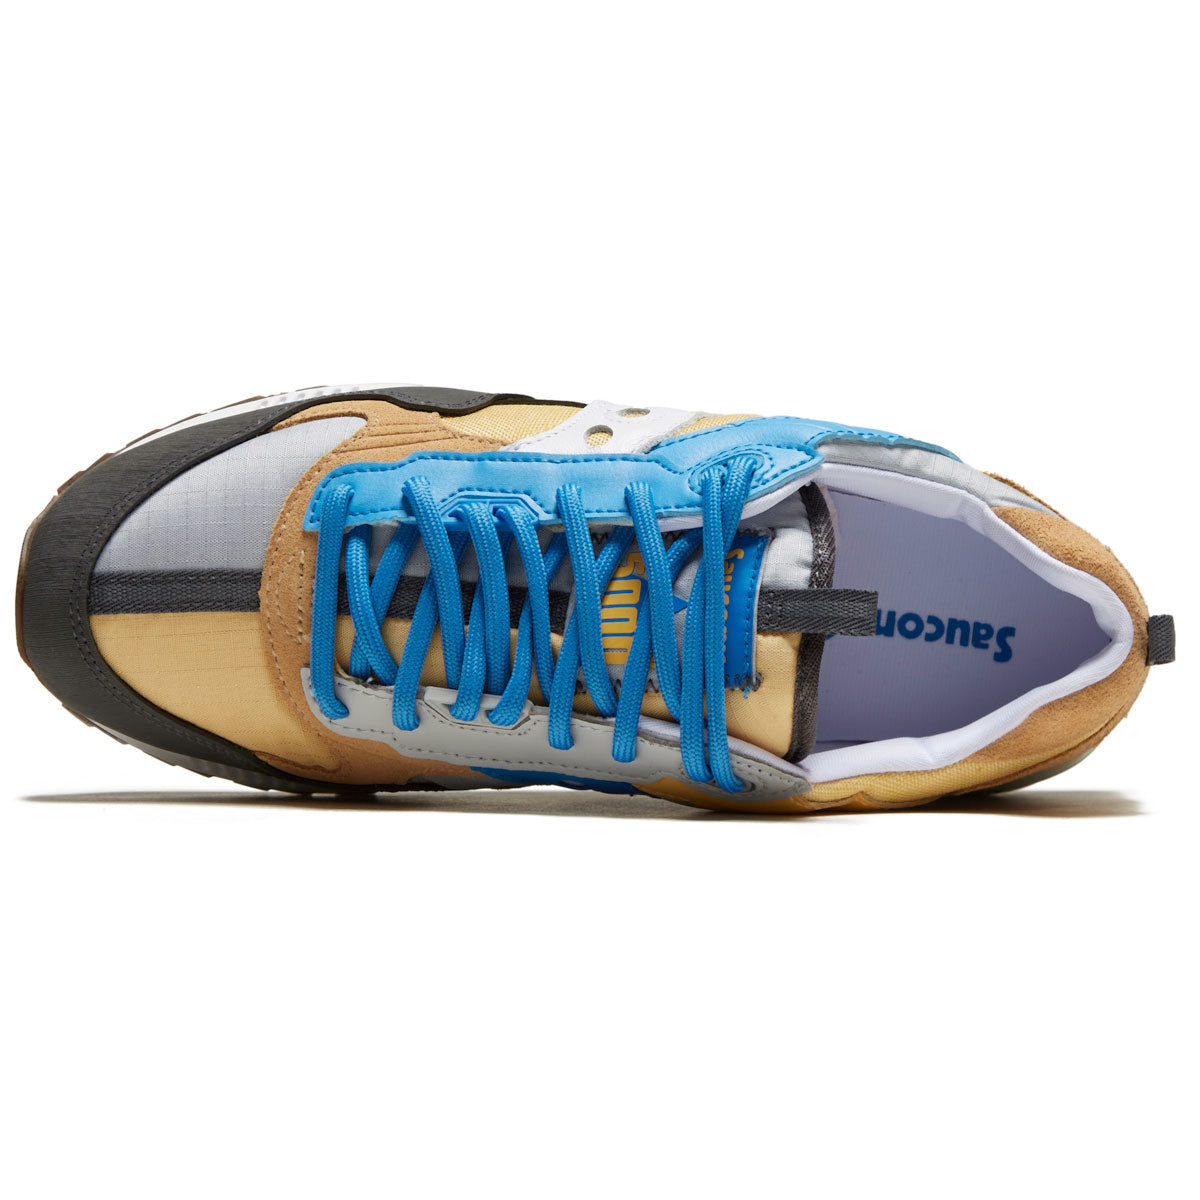 Saucony Shadow 5000 Shoes - Navy/Camel image 3